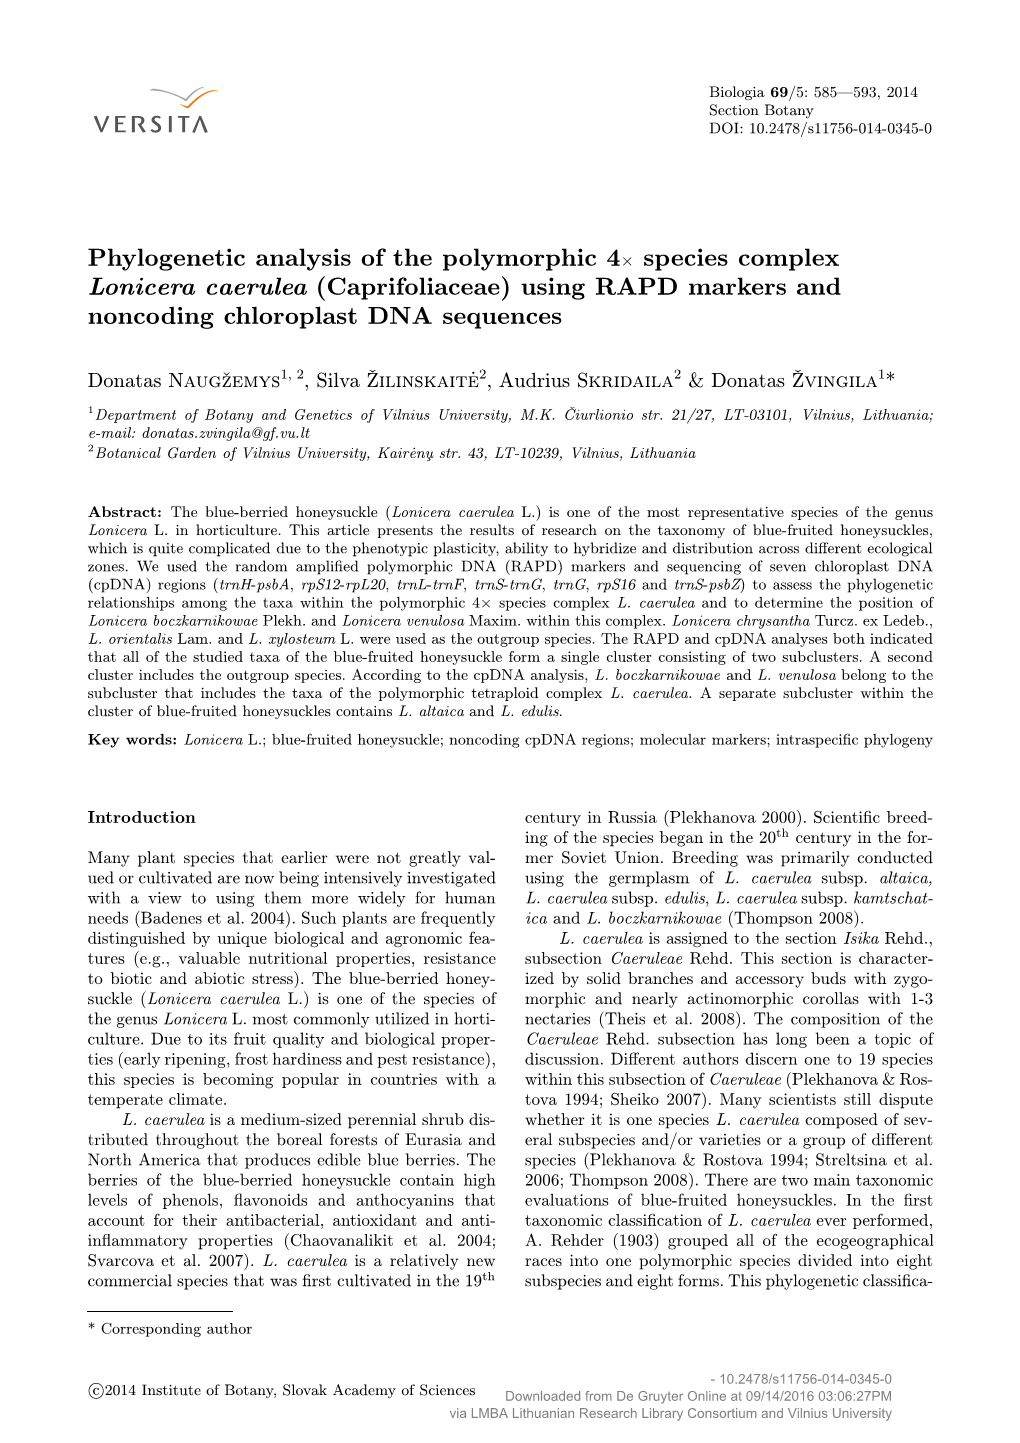 Phylogenetic Analysis of the Polymorphic 4× Species Complex Lonicera Caerulea (Caprifoliaceae) Using RAPD Markers and Noncoding Chloroplast DNA Sequences